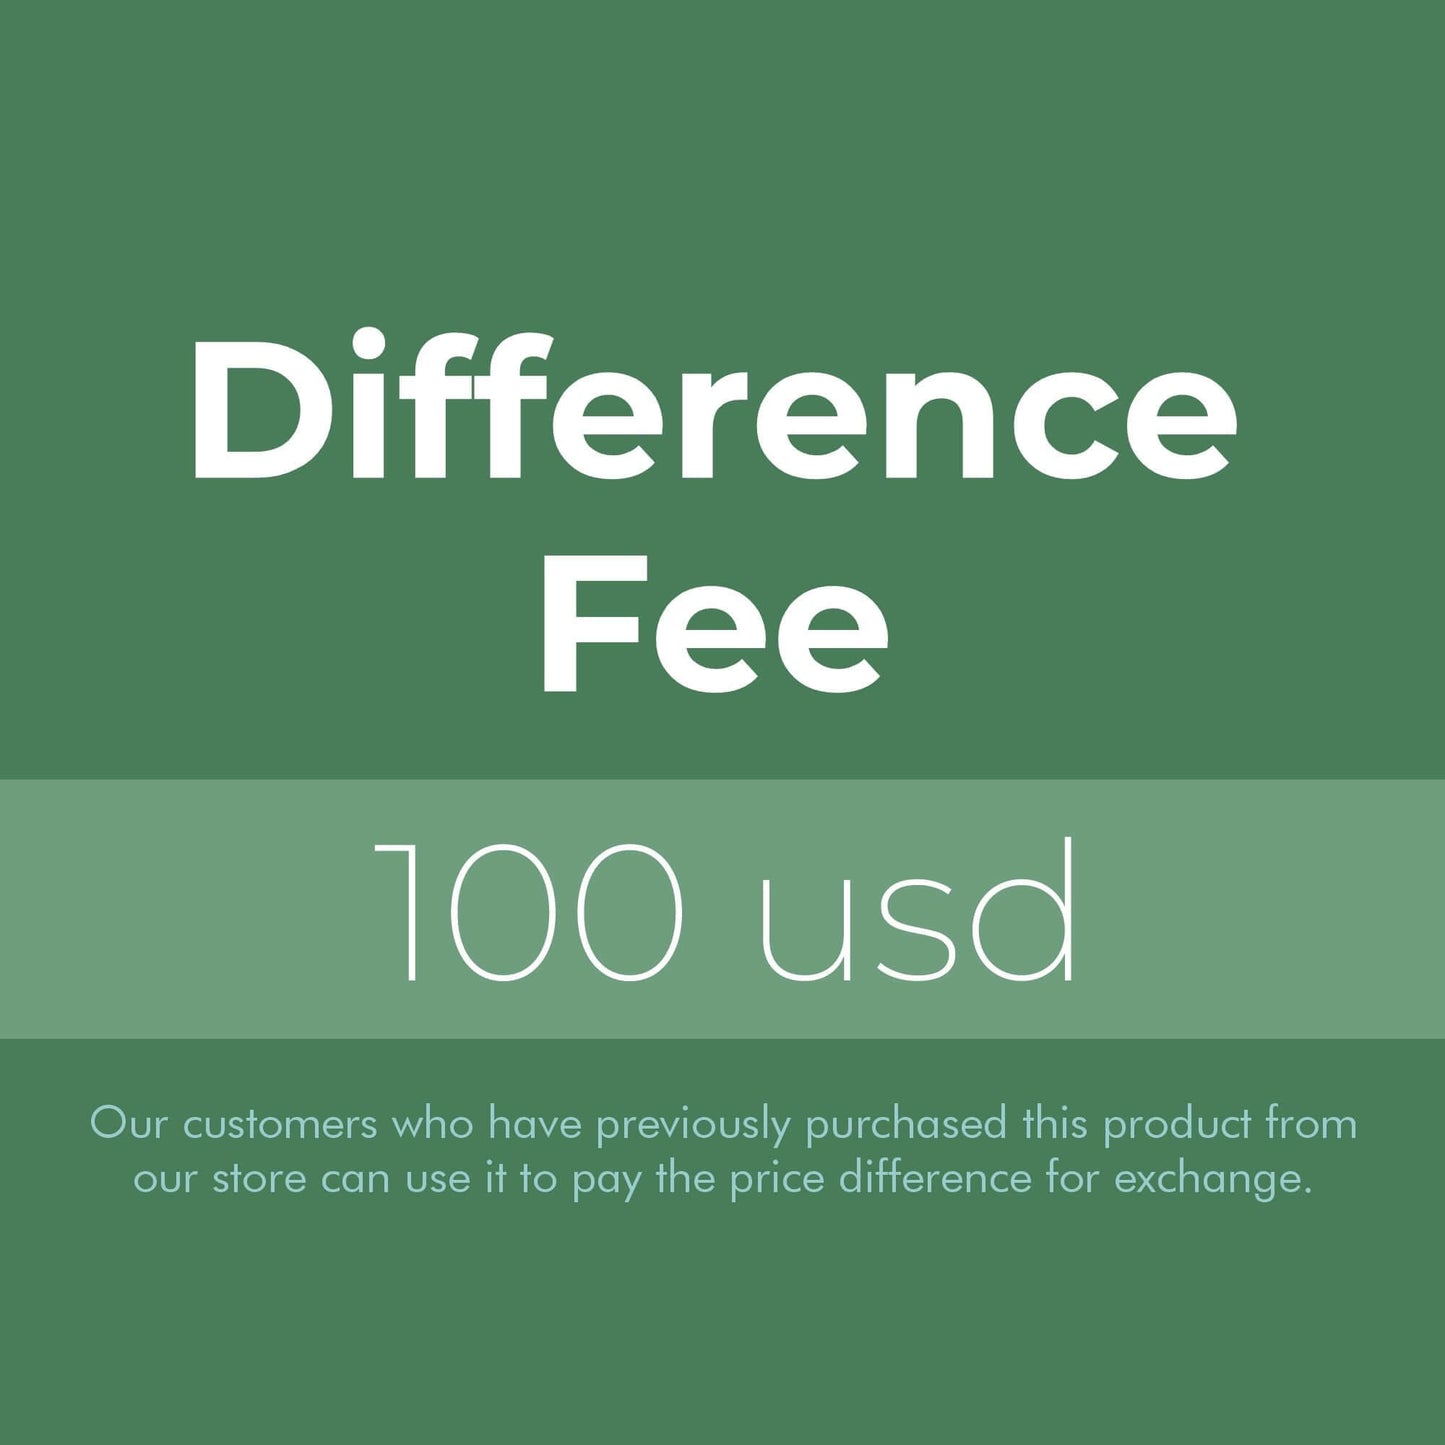 100 usd difference